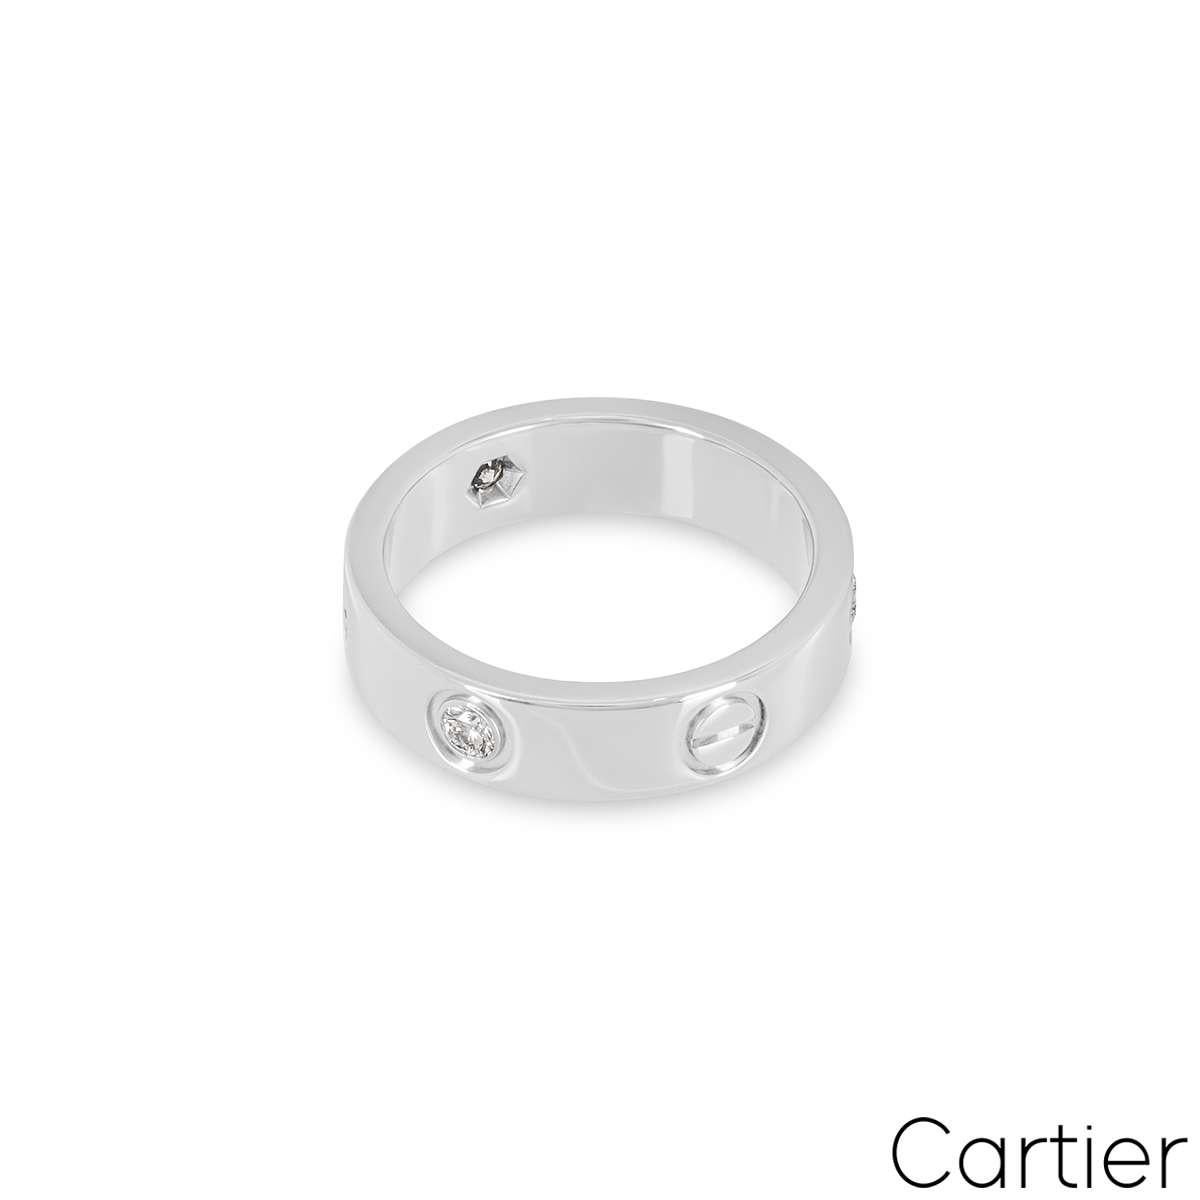 Cartier White Gold Half Diamond Love Ring Size 56 B4032500 In Excellent Condition For Sale In London, GB